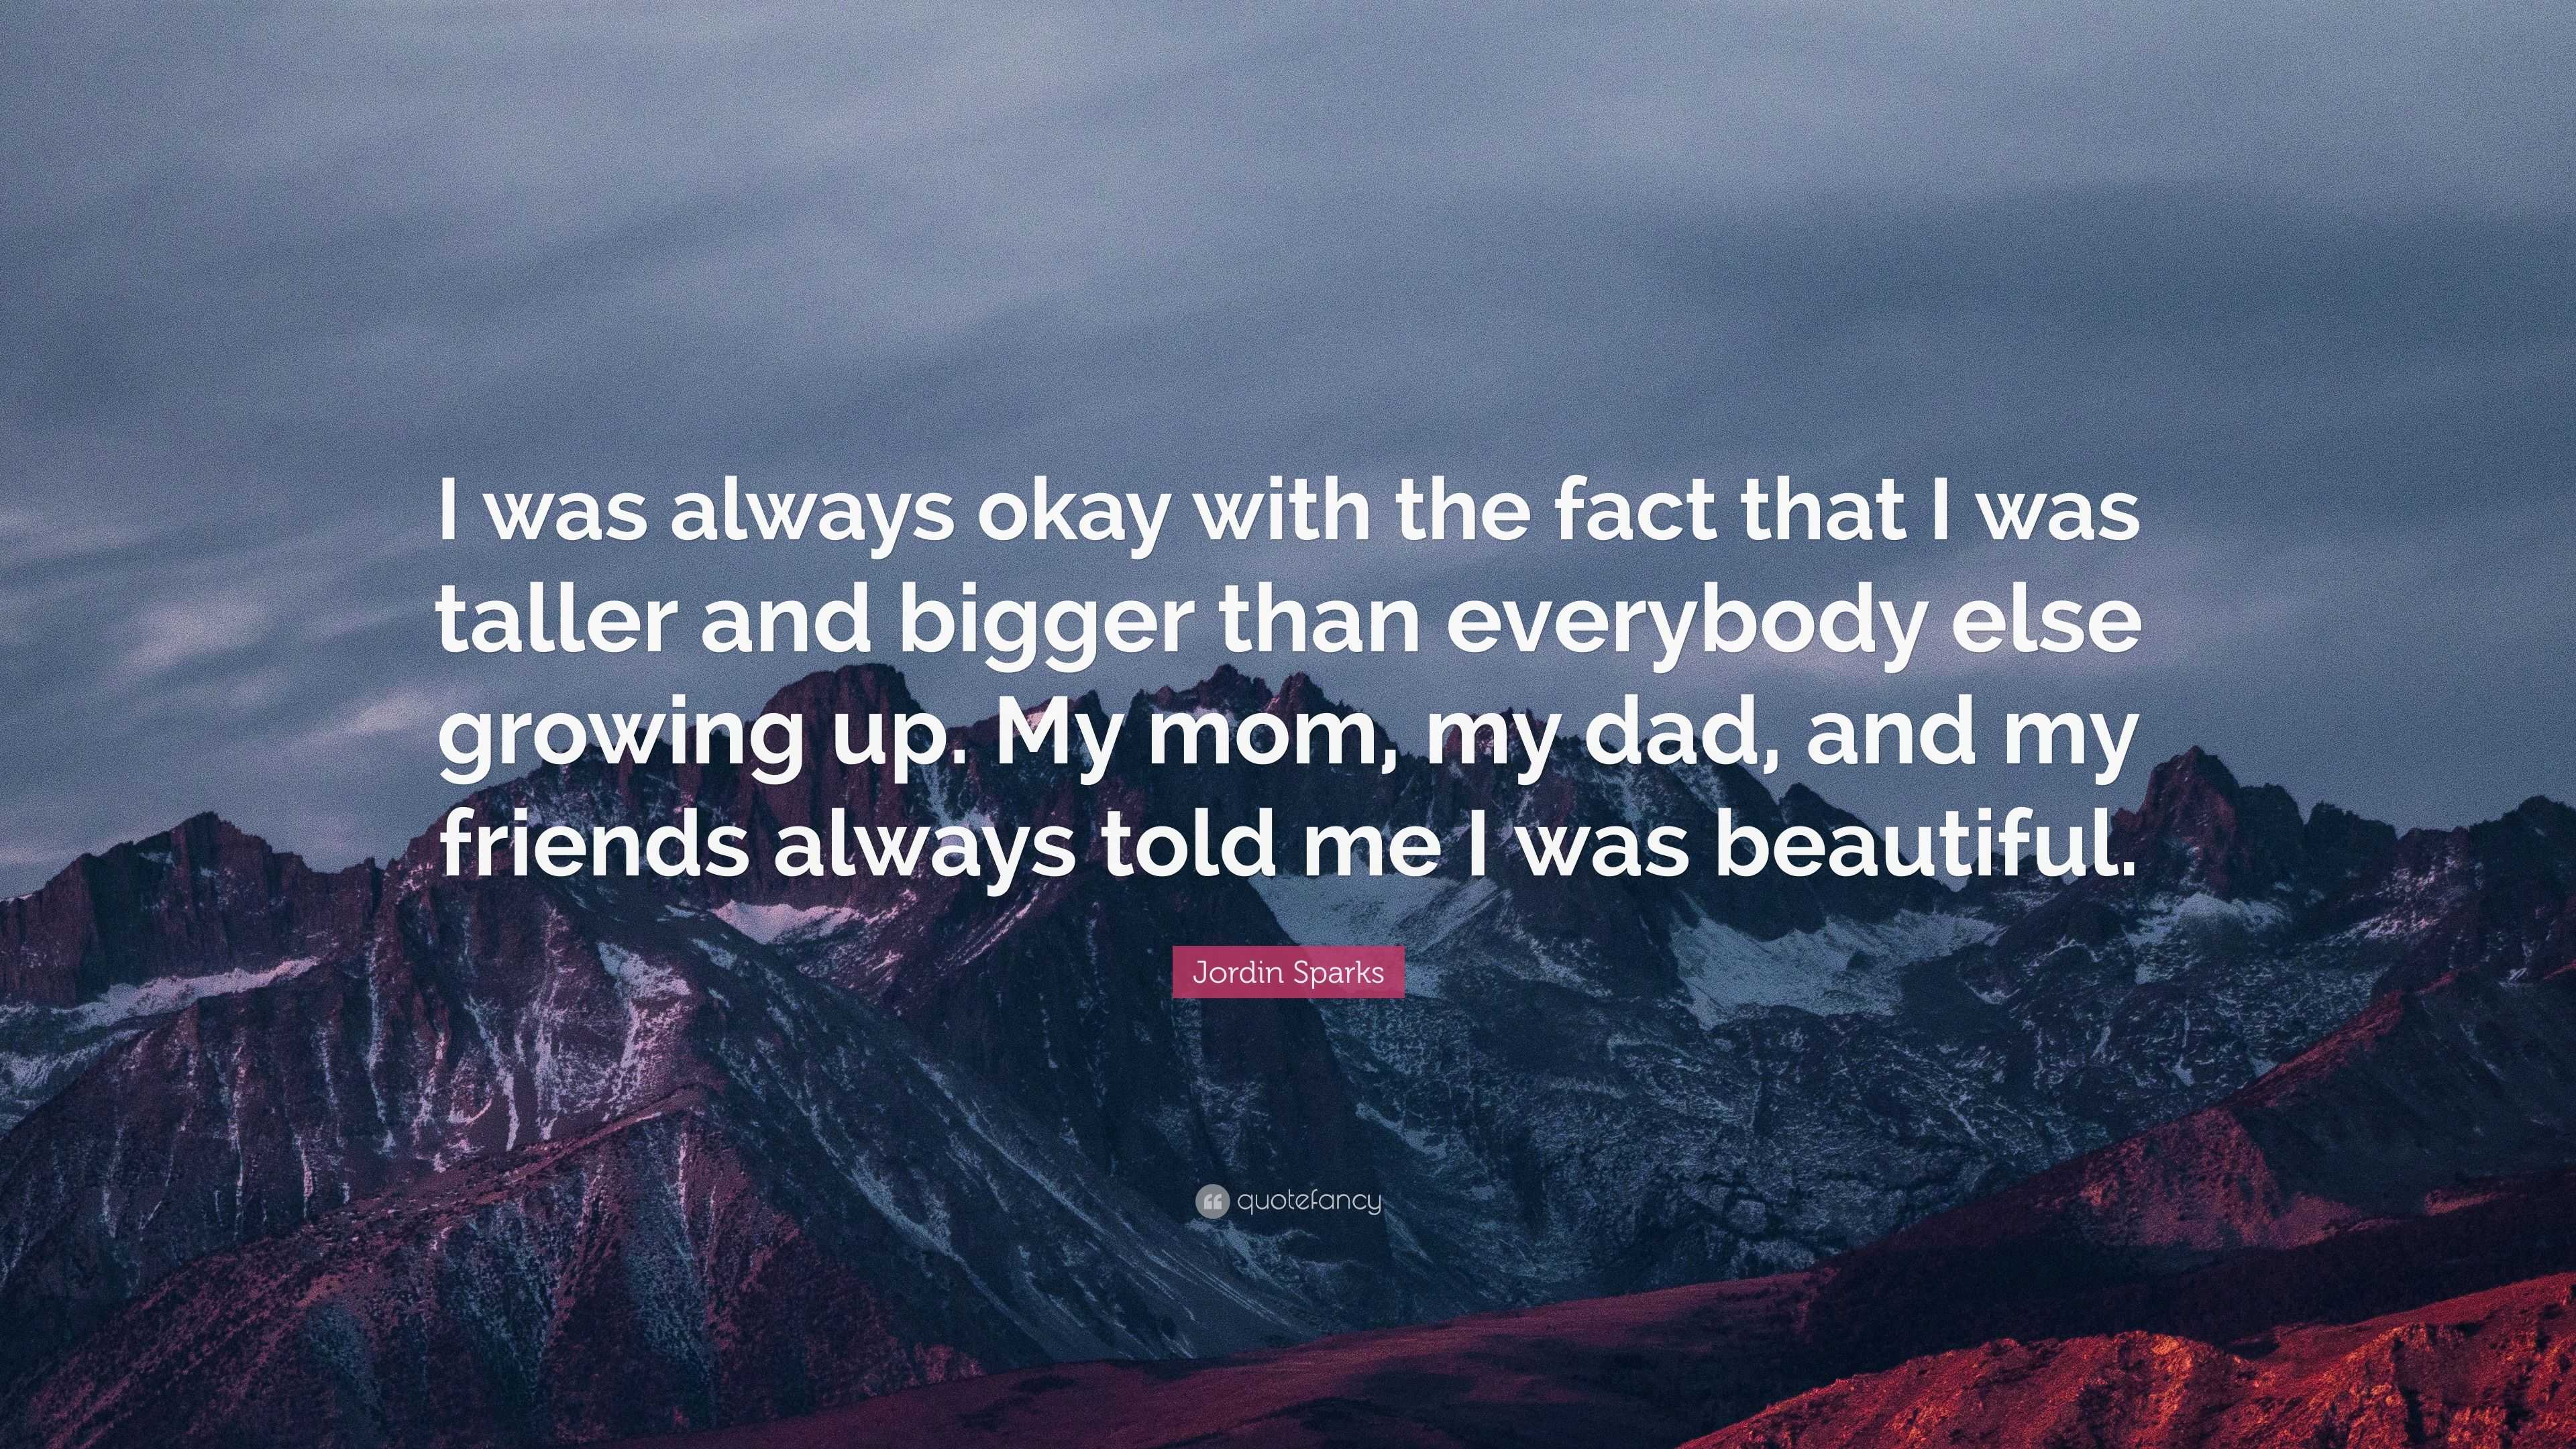 Jordin Sparks Quote: “I was always okay with the fact that I was taller ...